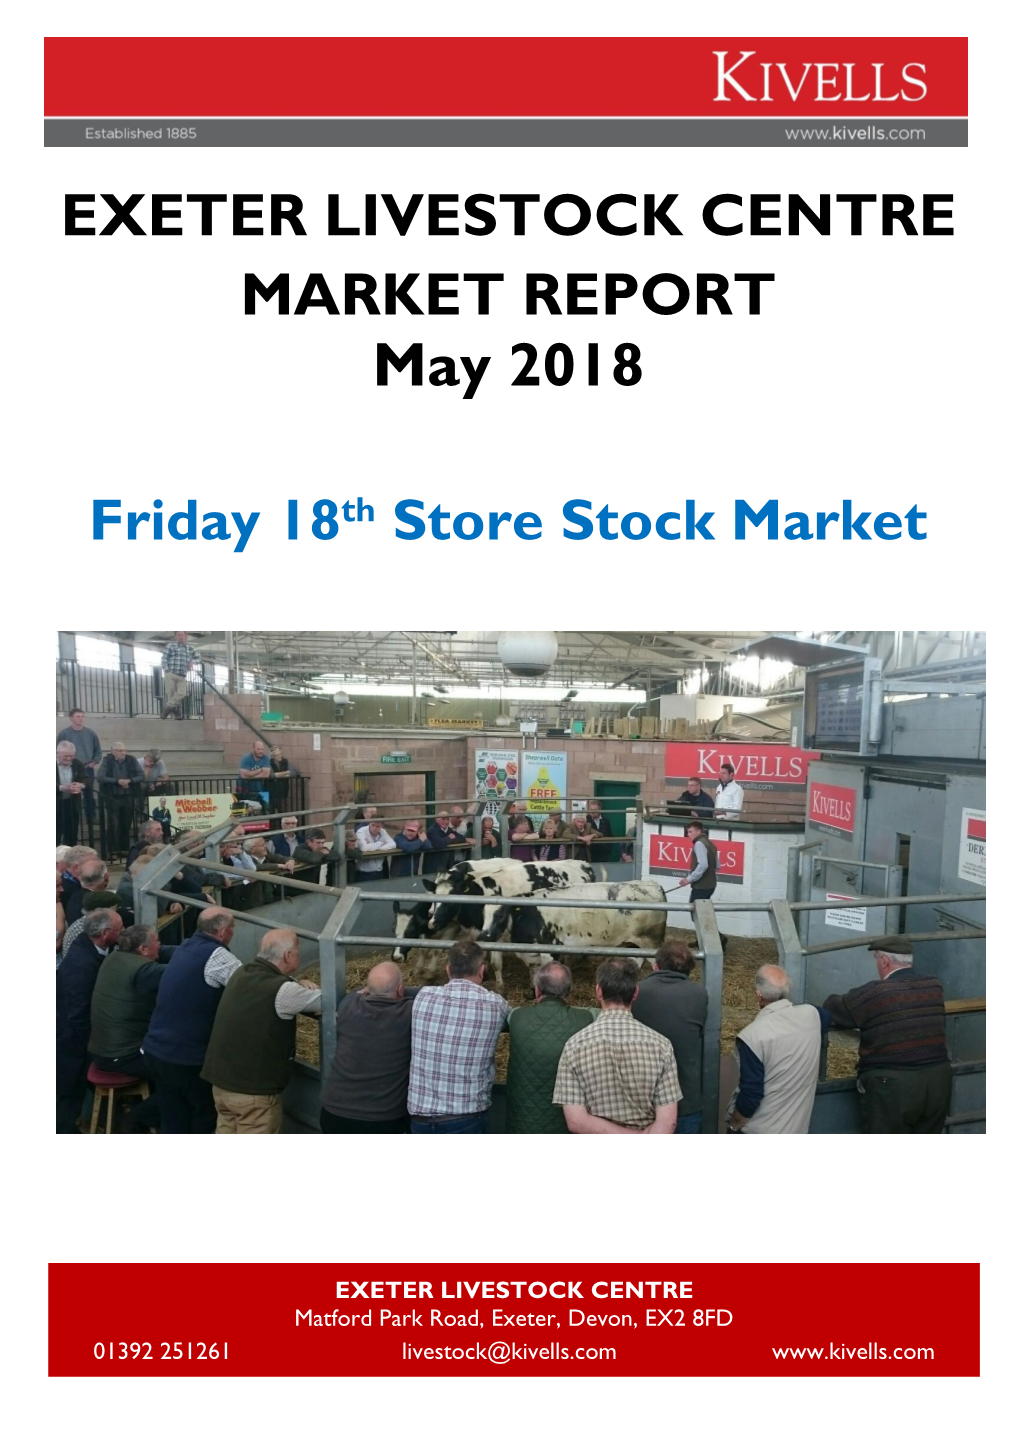 EXETER LIVESTOCK CENTRE MARKET REPORT May 2018 Friday 18Th Store Stock Market